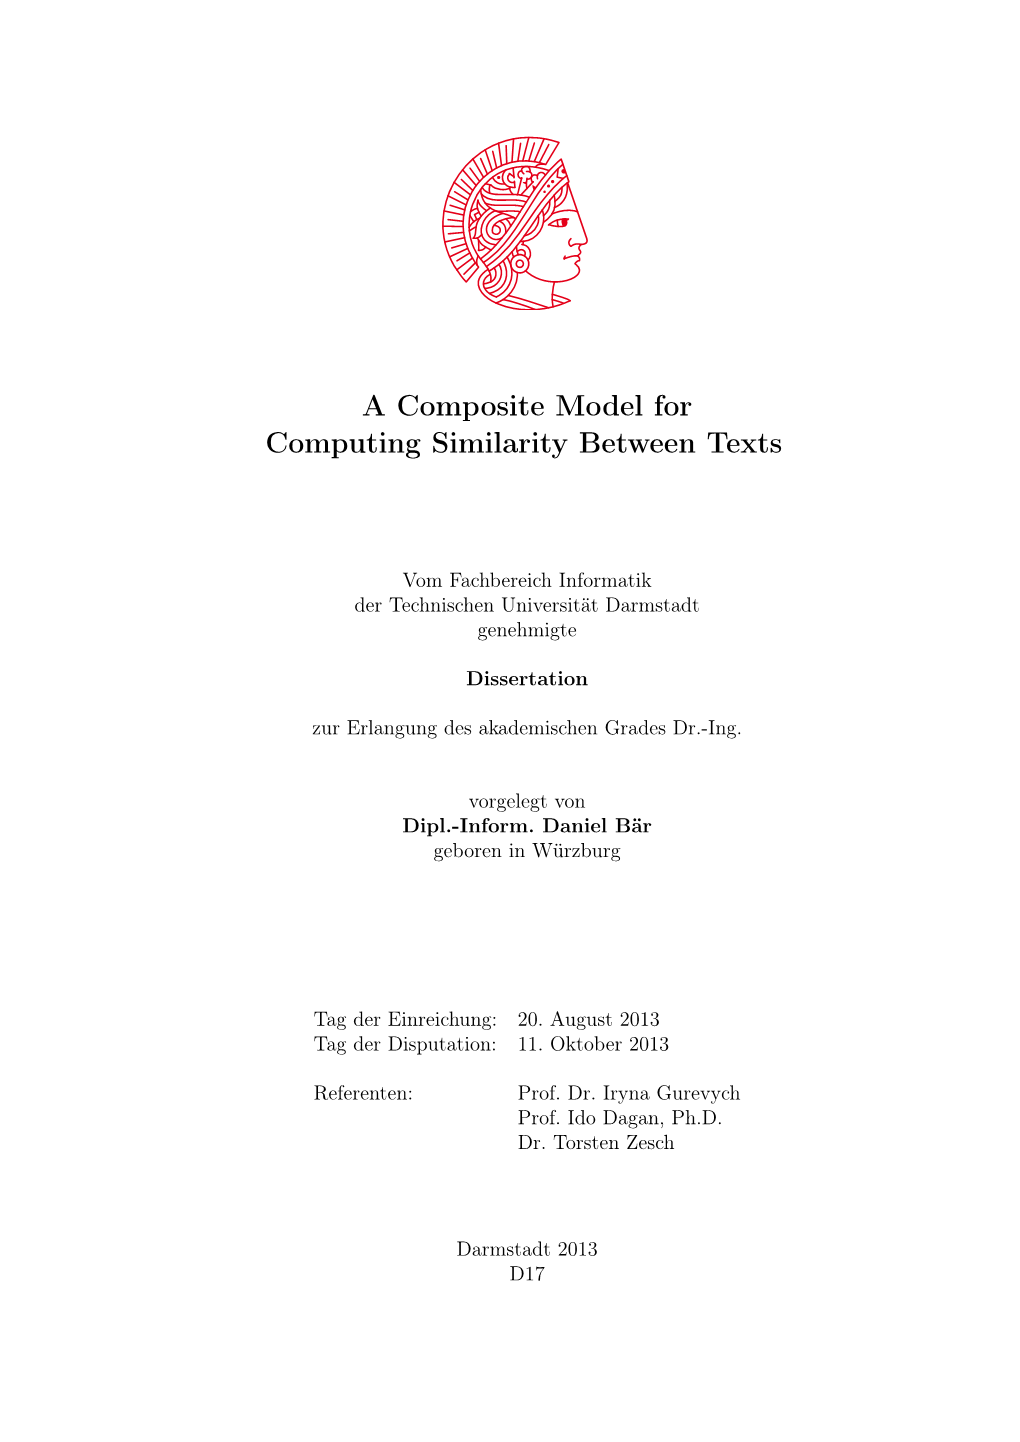 A Composite Model for Computing Similarity Between Texts